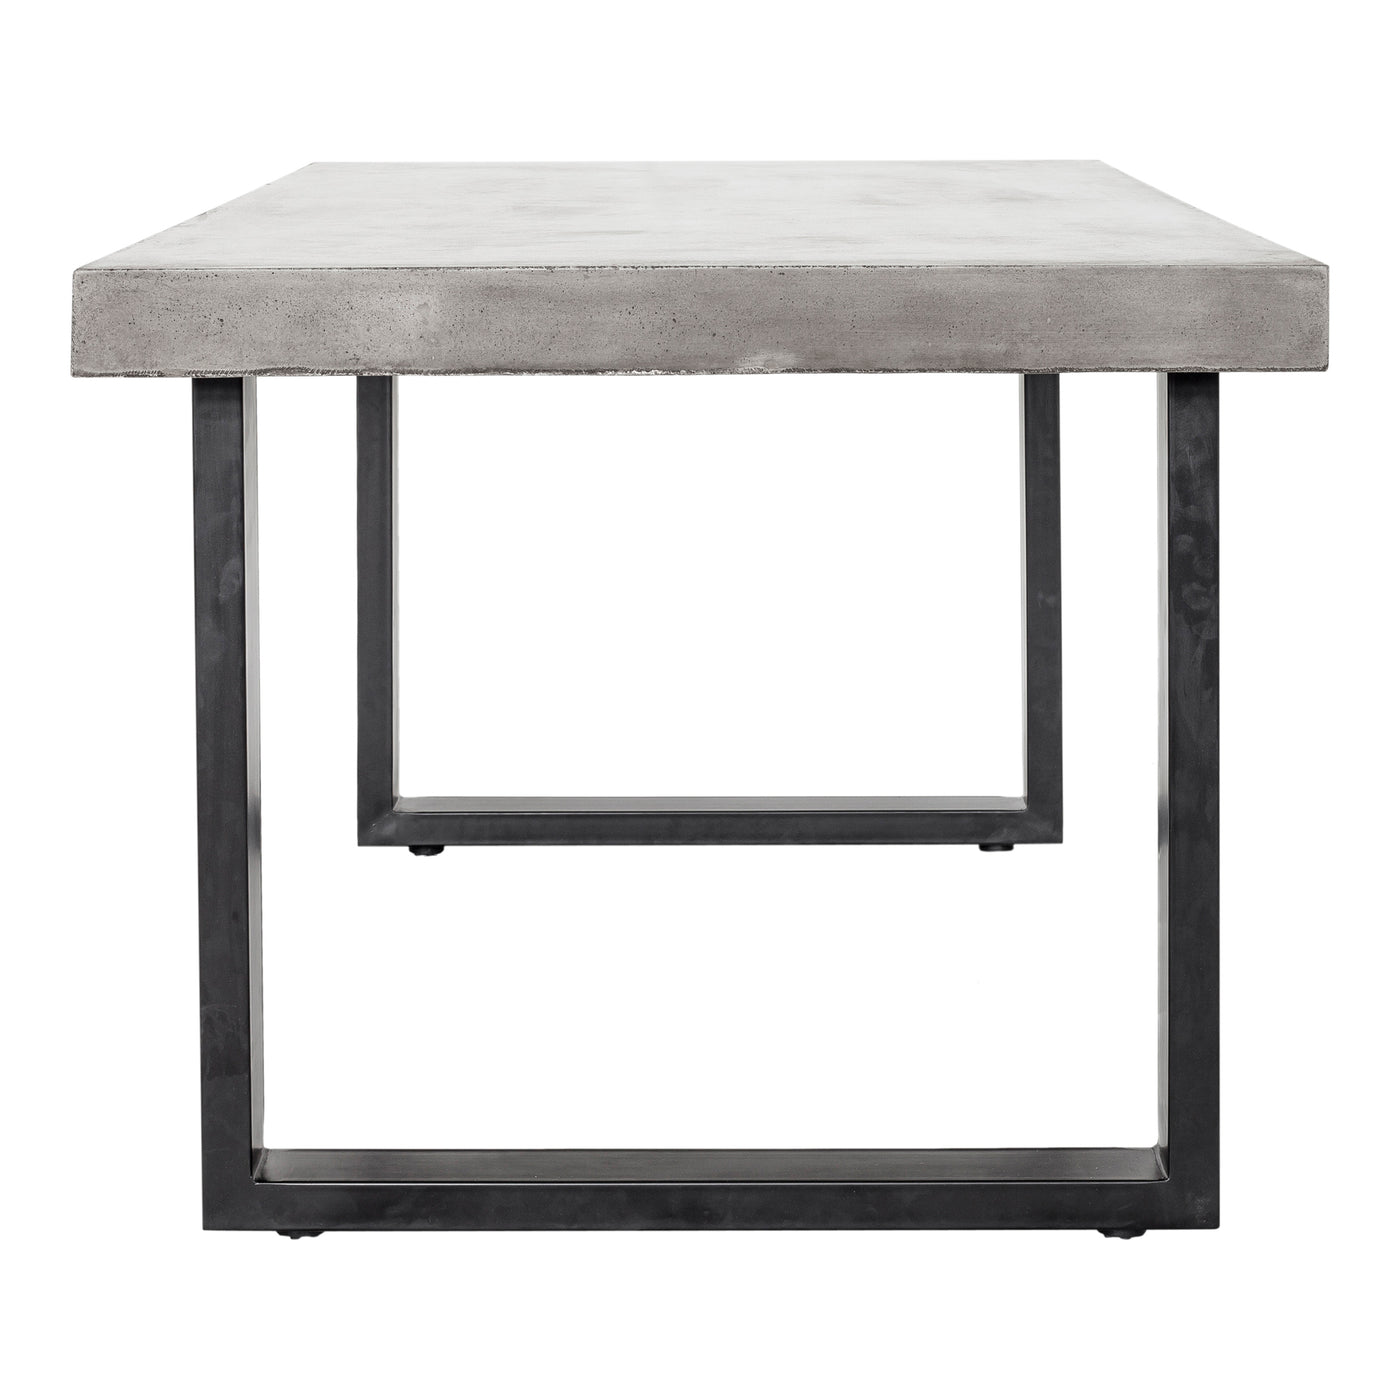 Perfect for indoors or out, the Jedrik is a cool cement and fiber table with black steel legs.
<h6>Dimensions</h6>
H= 30.2...